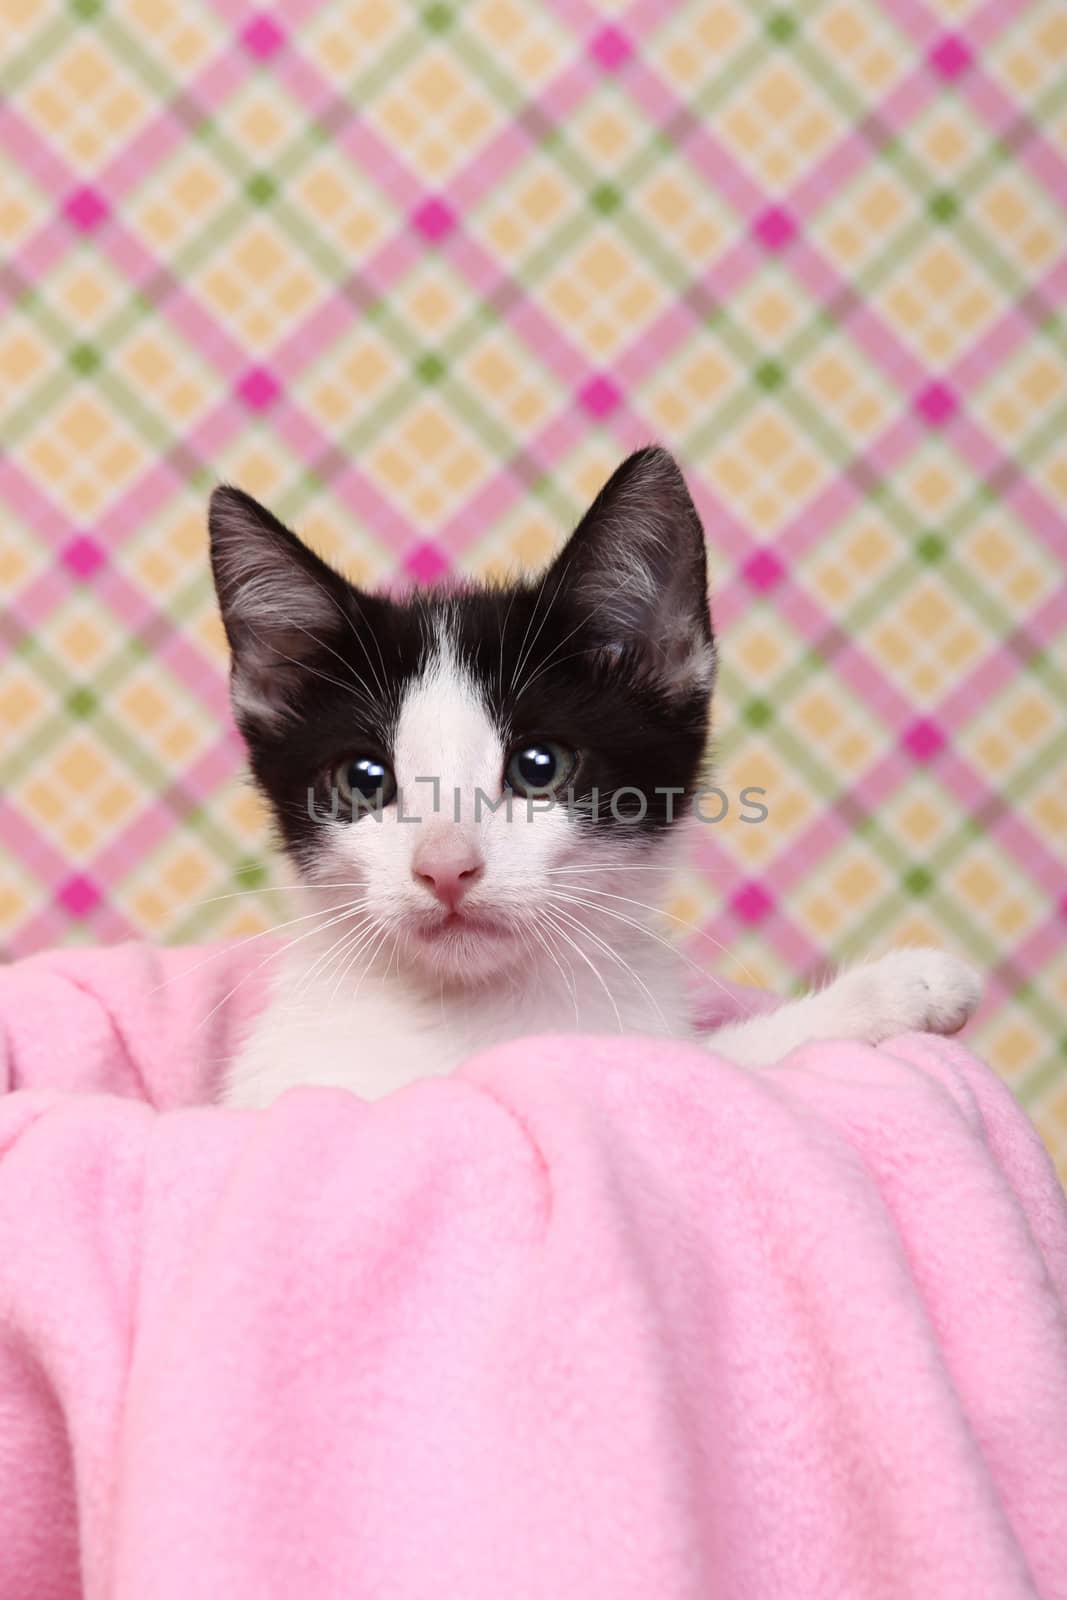 Sweet Kitten on a Pink Soft Background